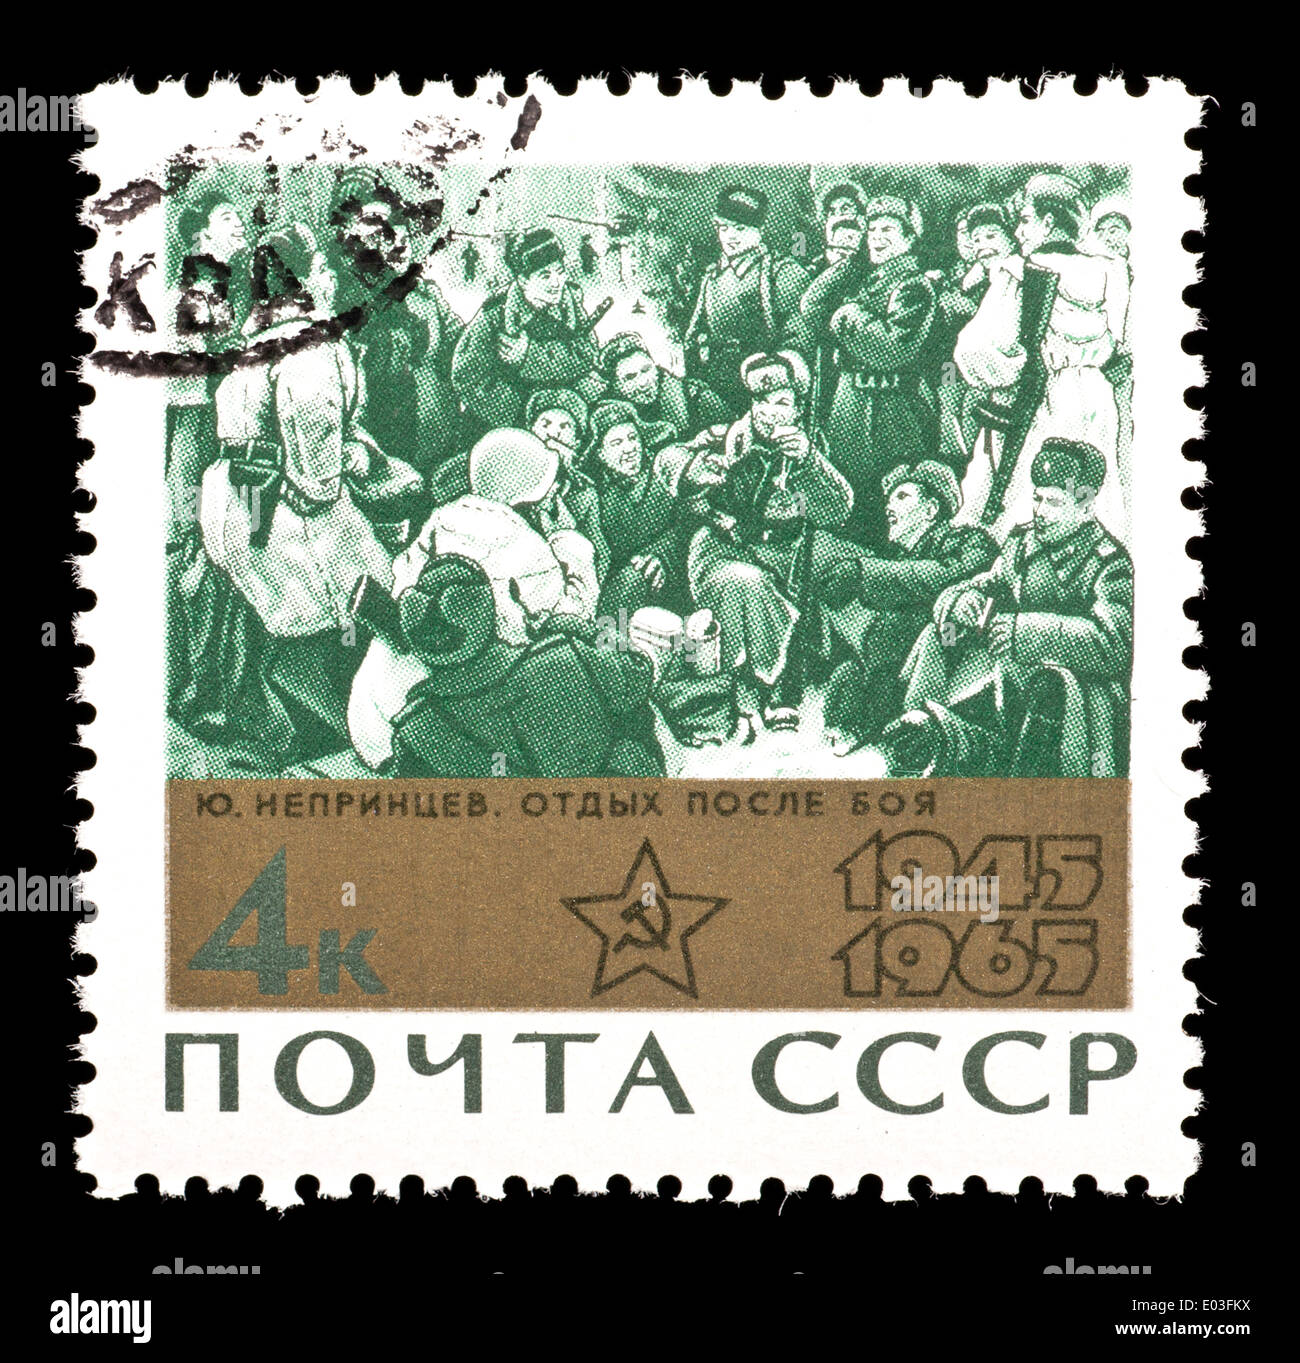 Postage stamp from the Soviet Union (USSR) depicting the Y. Neprintsev painting 'Rest after the Battle' Stock Photo